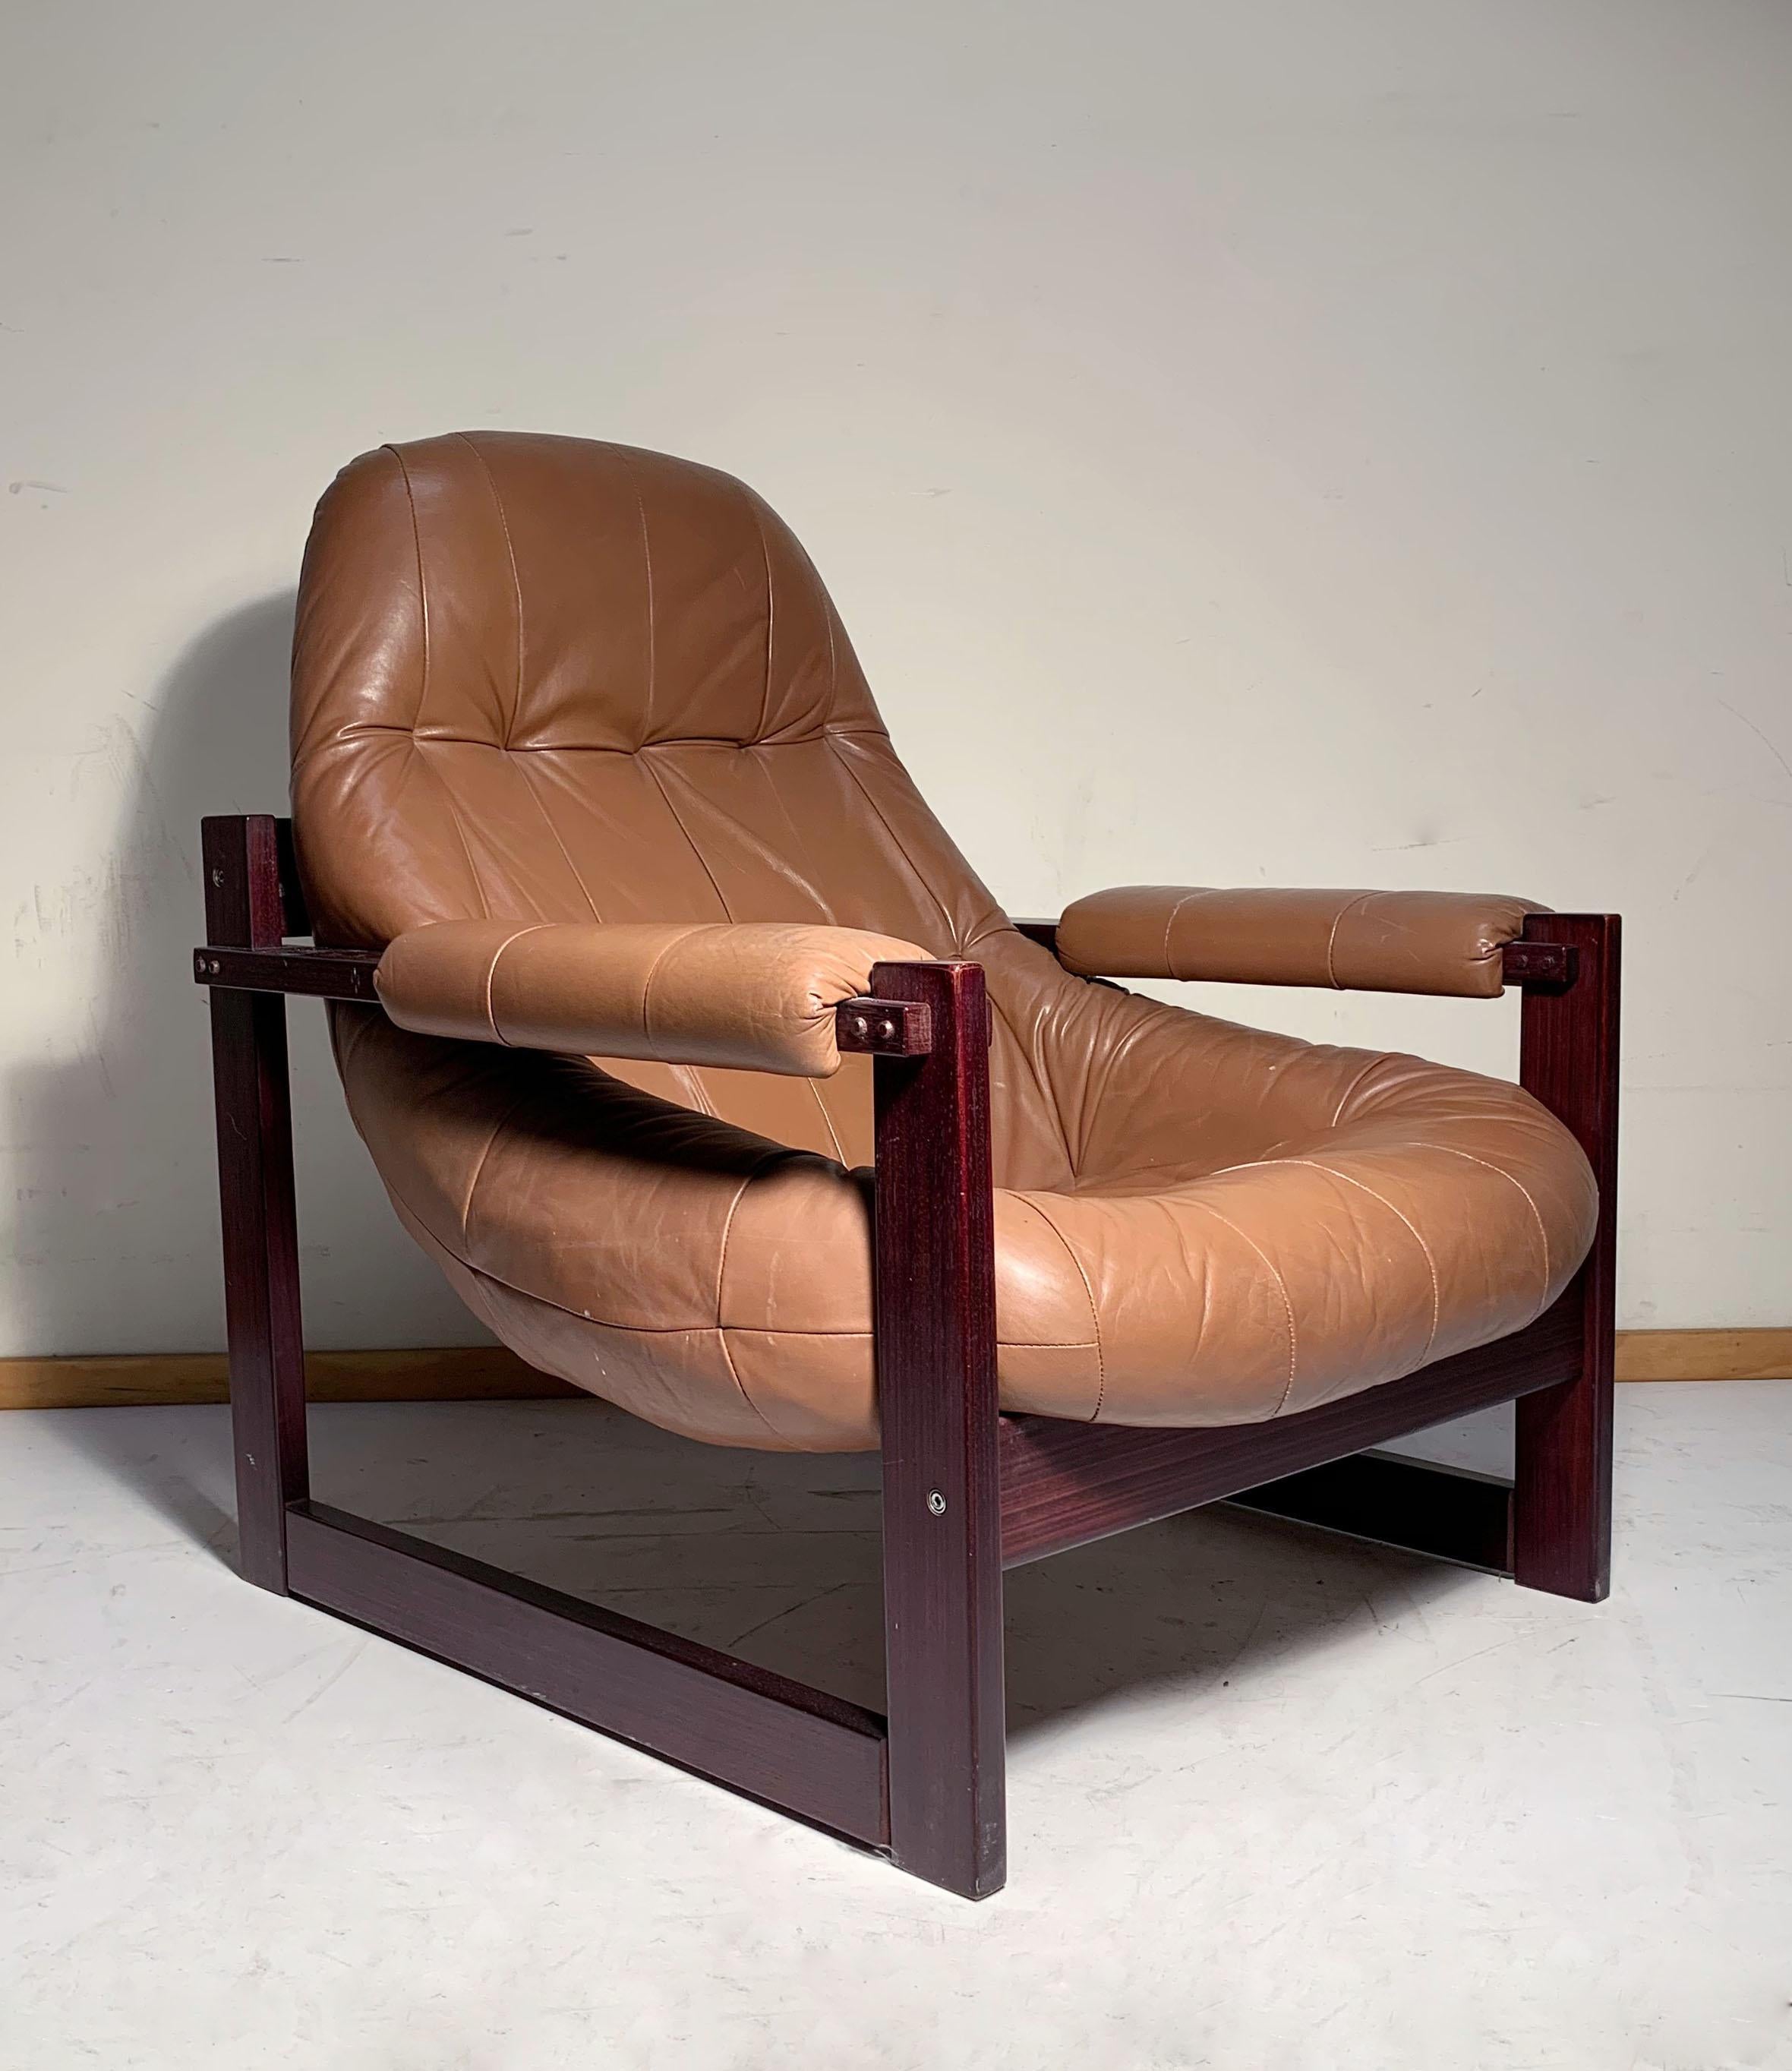 Percival Lafer Brazilian leather lounge. A nice Percival form in nice vintage condition. In the manner of Milo Baughman.